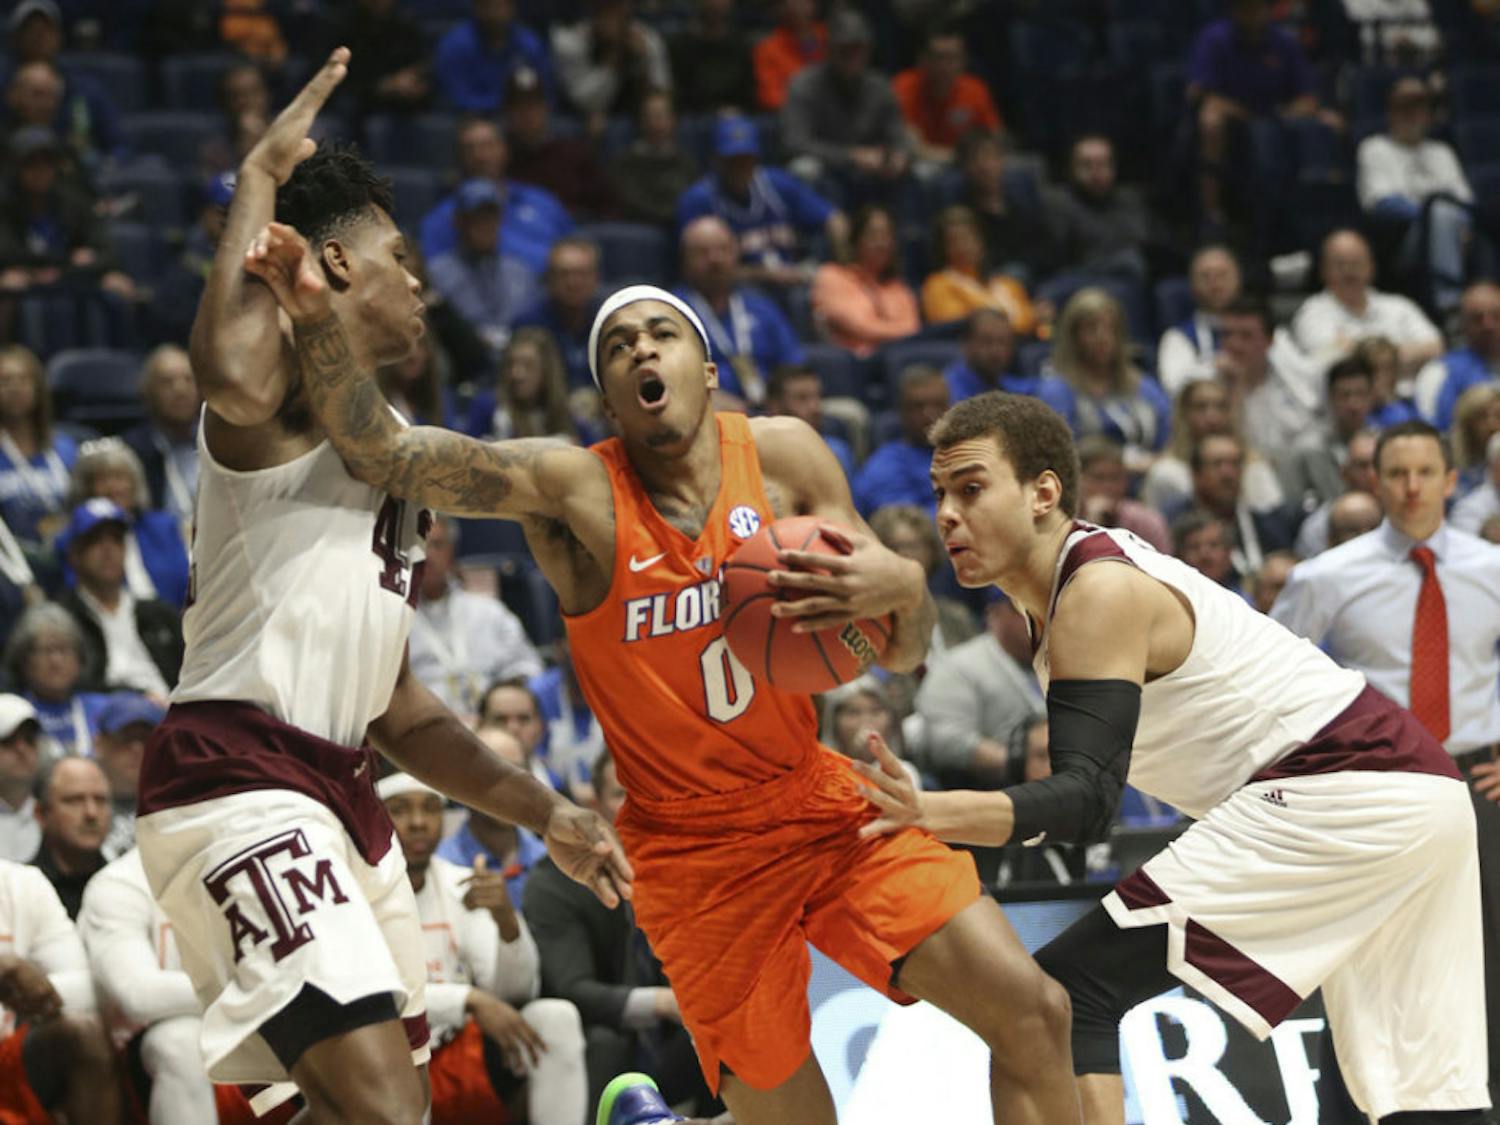 Florida's Kasey Hill, center, tries to drive between Texas A&amp;M's Tavario Miller, left, and DJ Hogg, right, during the second half of an NCAA college basketball game in the Southeastern Conference tournament in Nashville, Tenn., Friday, March 11, 2016. (AP Photo/John Bazemore)